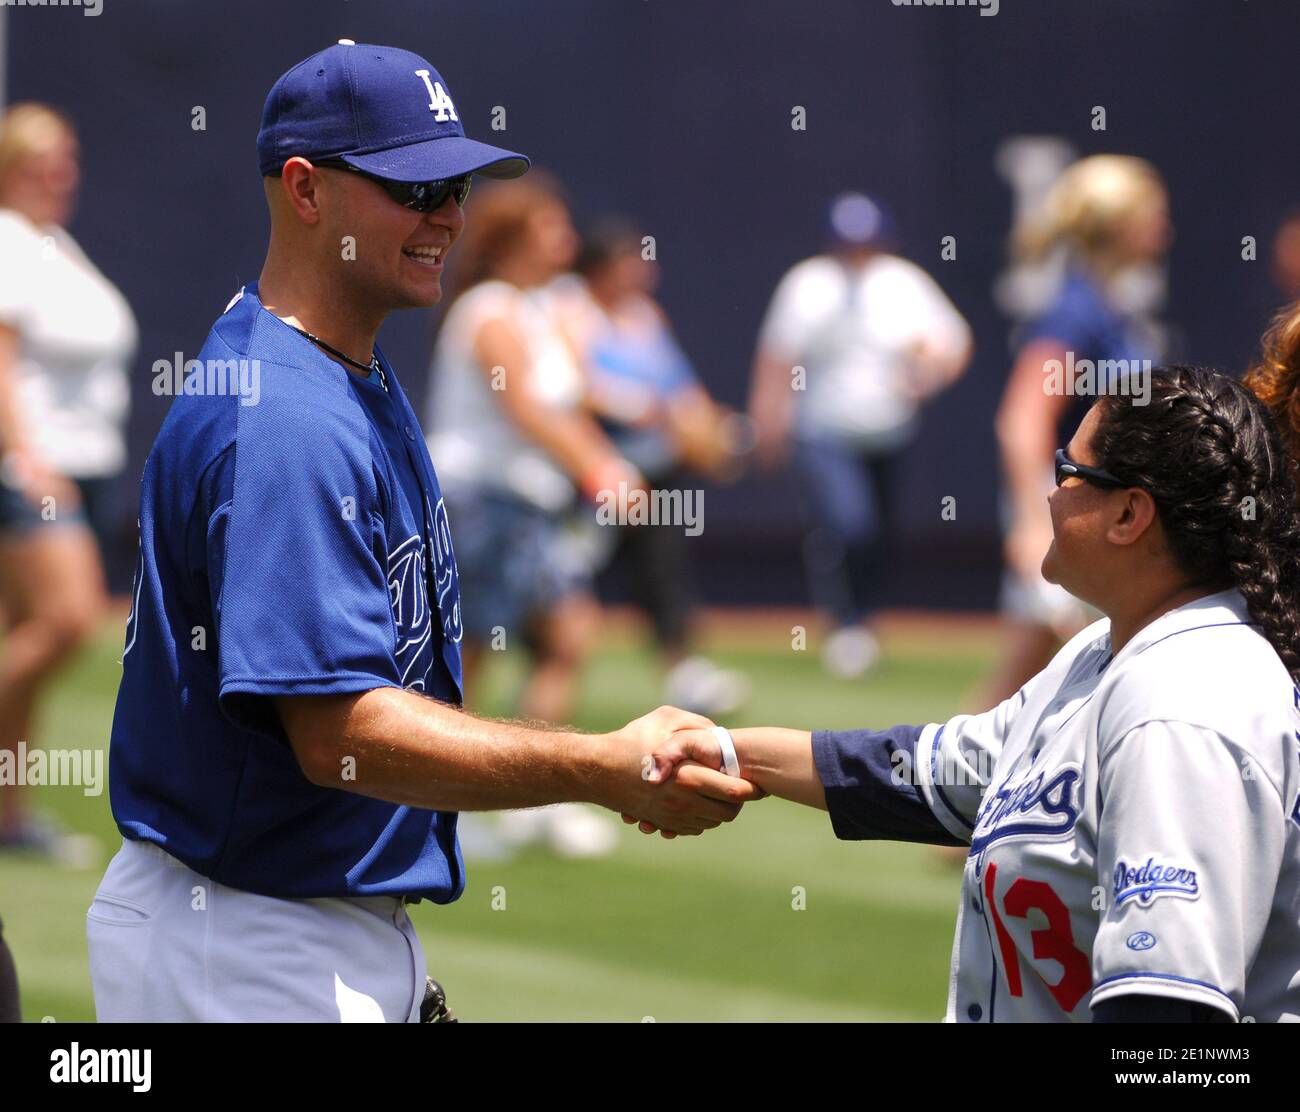 Los Angeles Dodgers outfielder Cody Ross greets women at Los Angeles Dodgers Women's Initiative & Network Baseball Clinic at Dodger Stadium in Los Ang Stock Photo